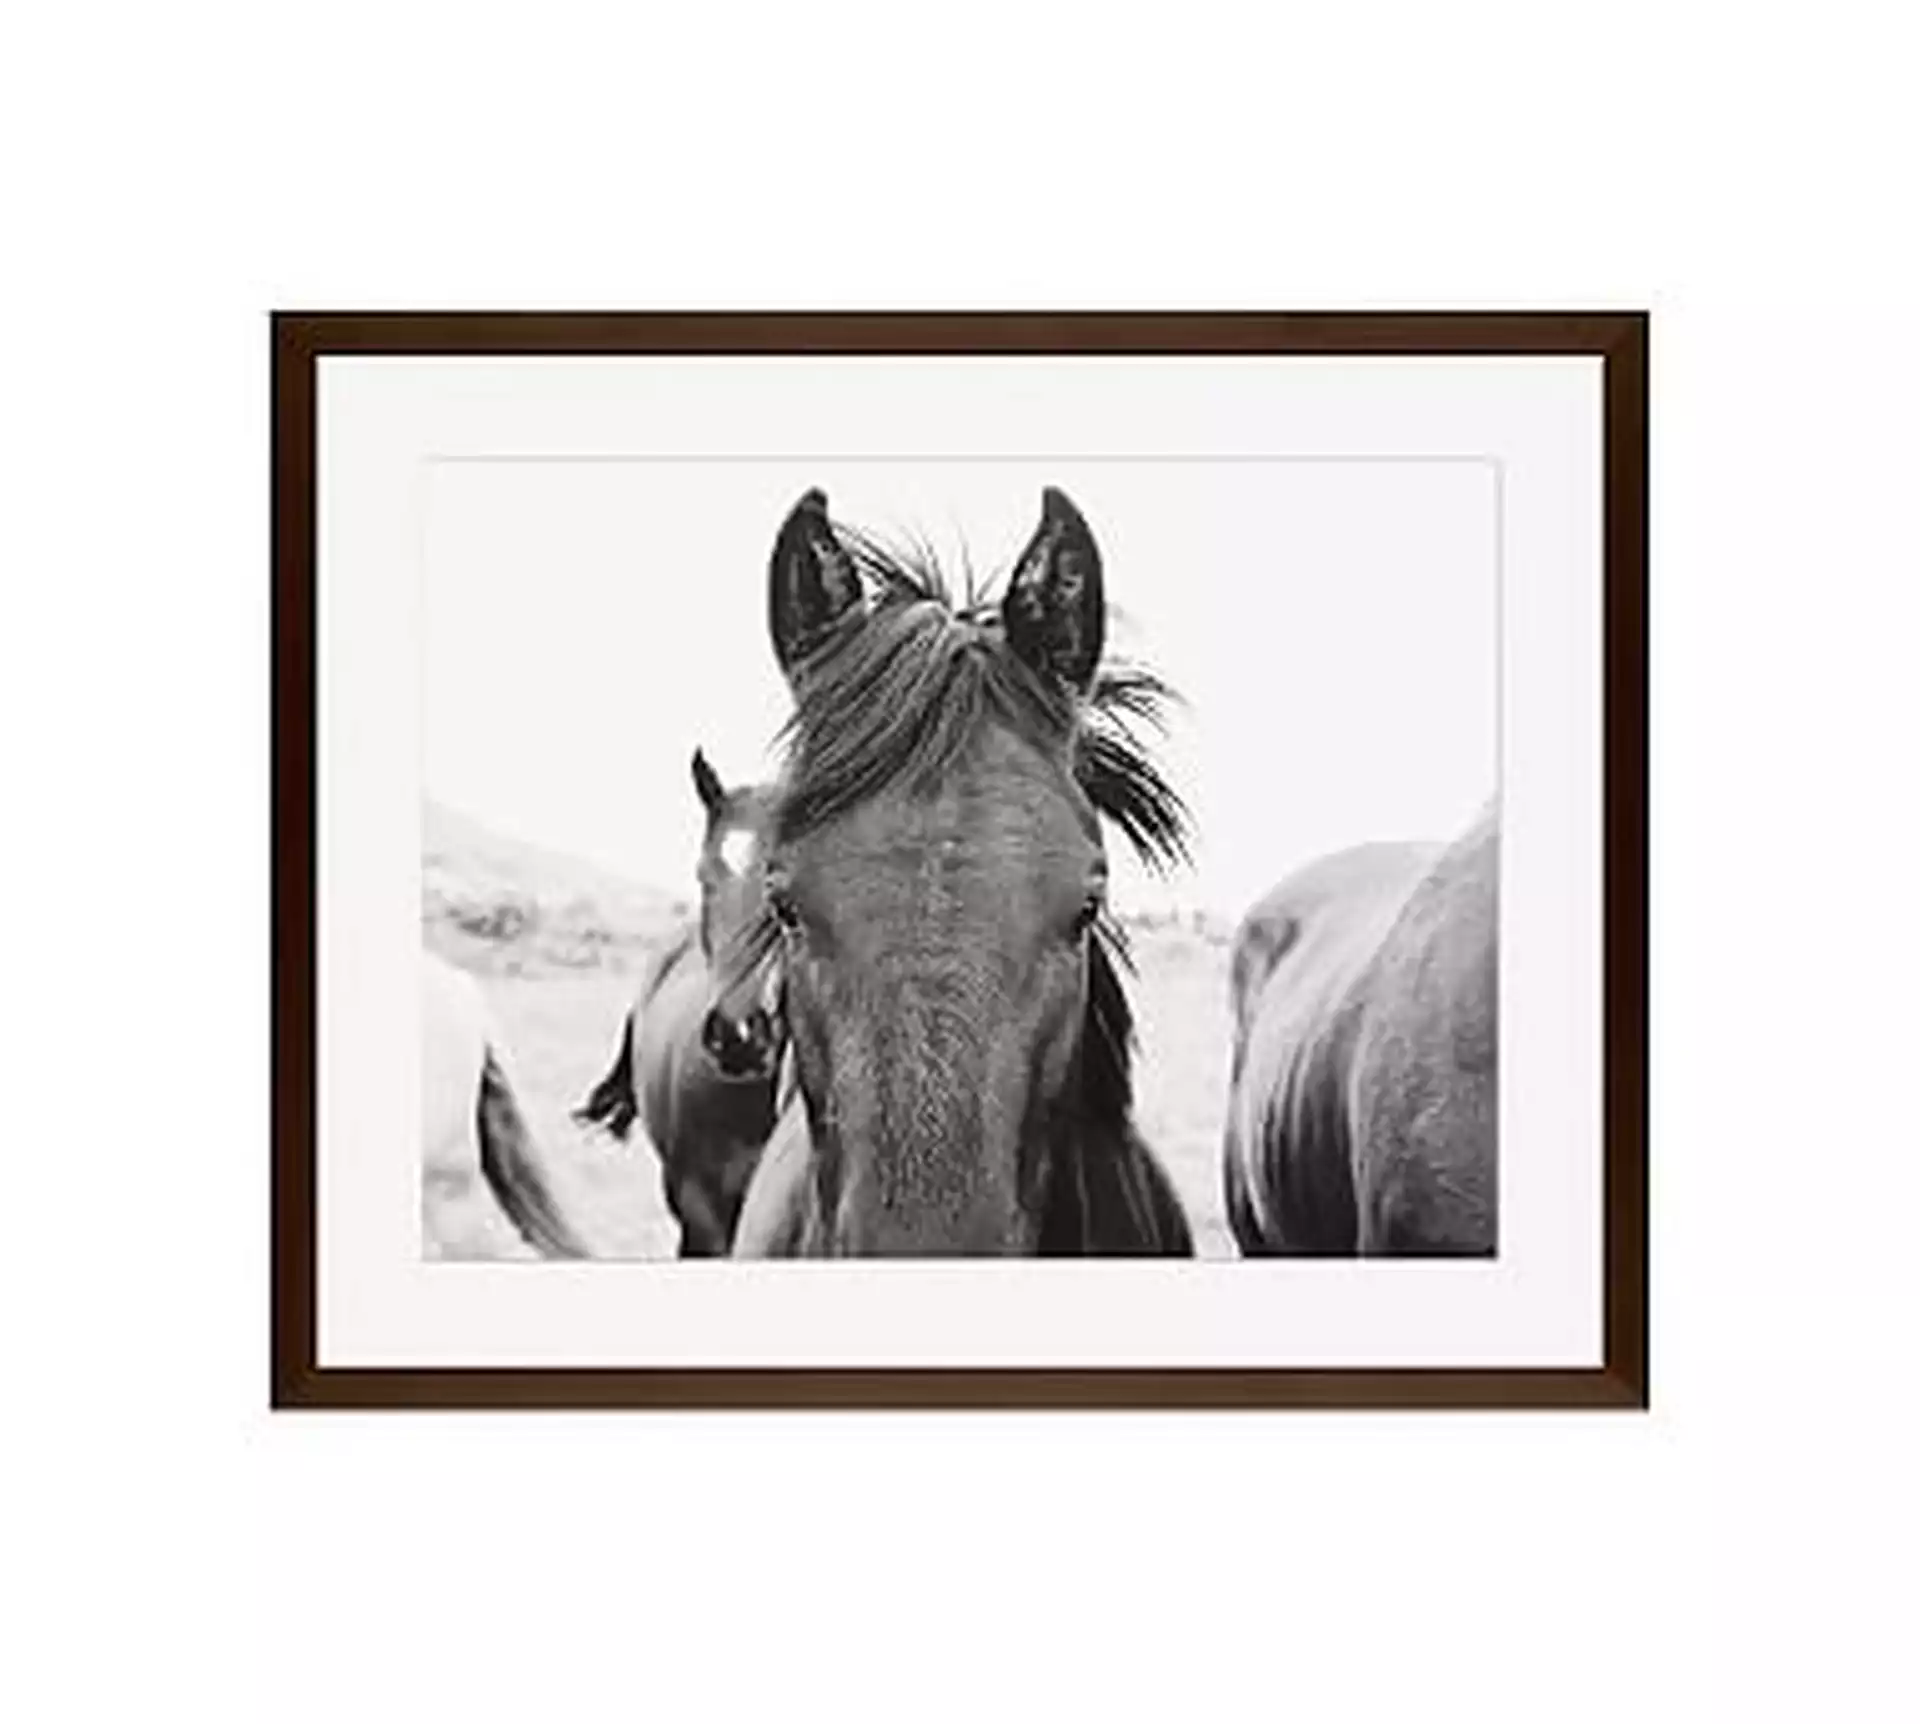 Hello There Framed Print by Jennifer Meyers, 16x20", Wood Gallery Frame, Espresso, Mat